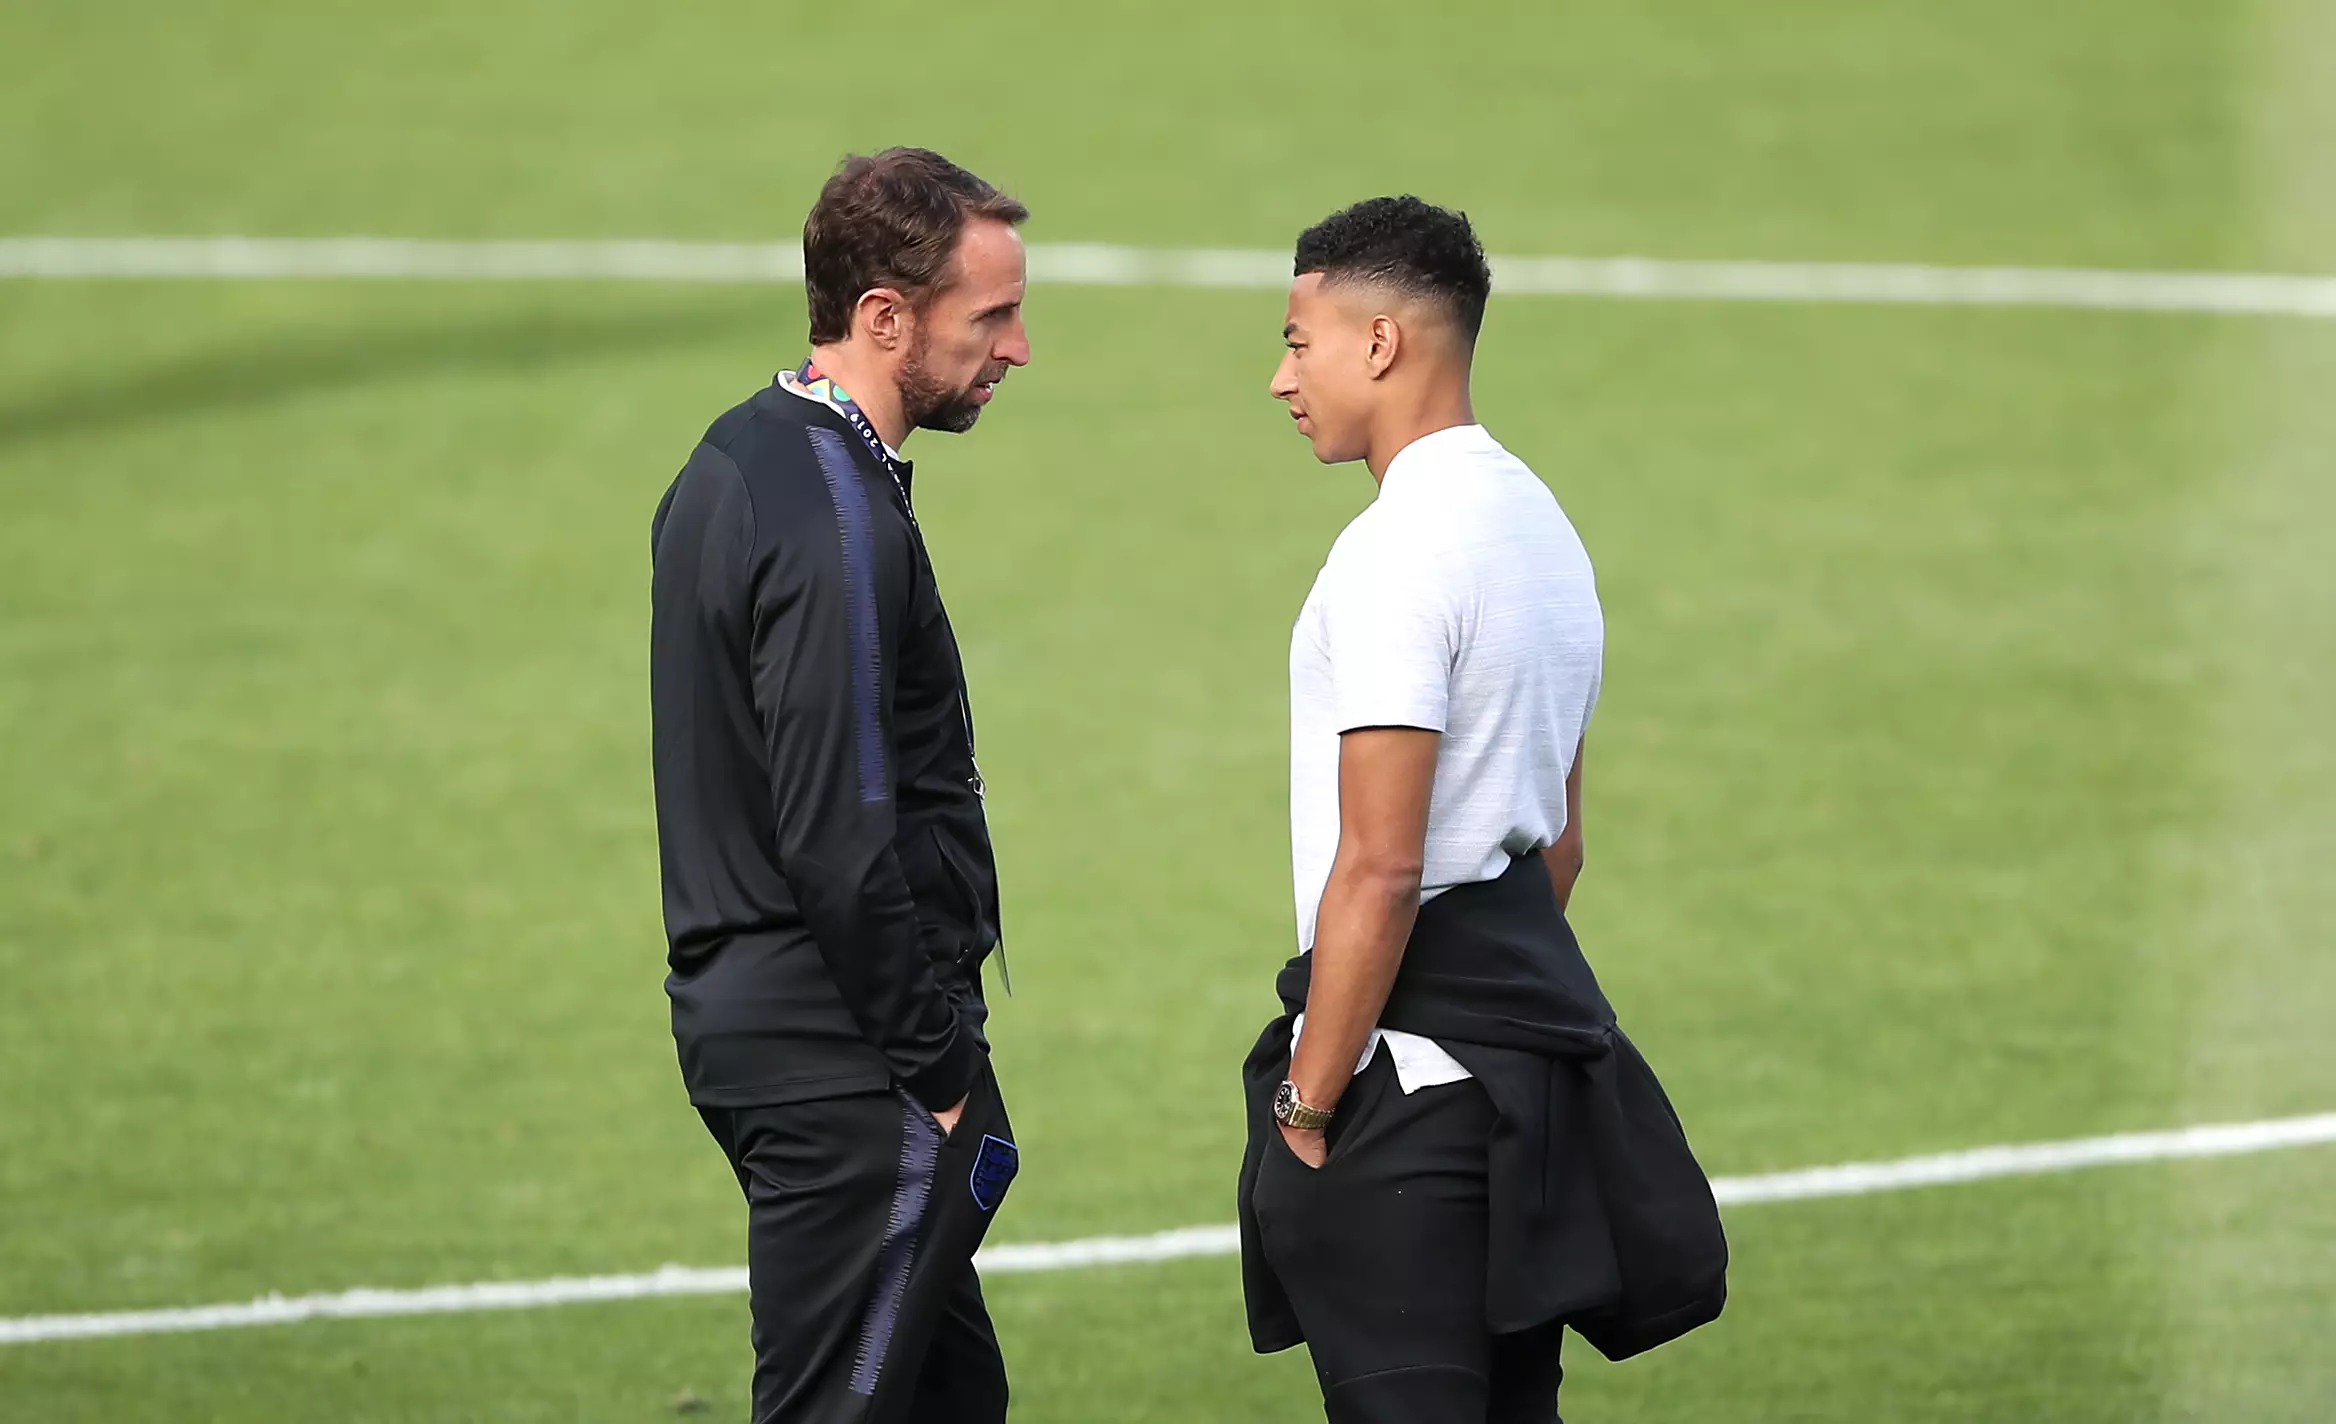 Jesse Lingard was left out of Gareth Southgate's 26-man squad for Euro 2020